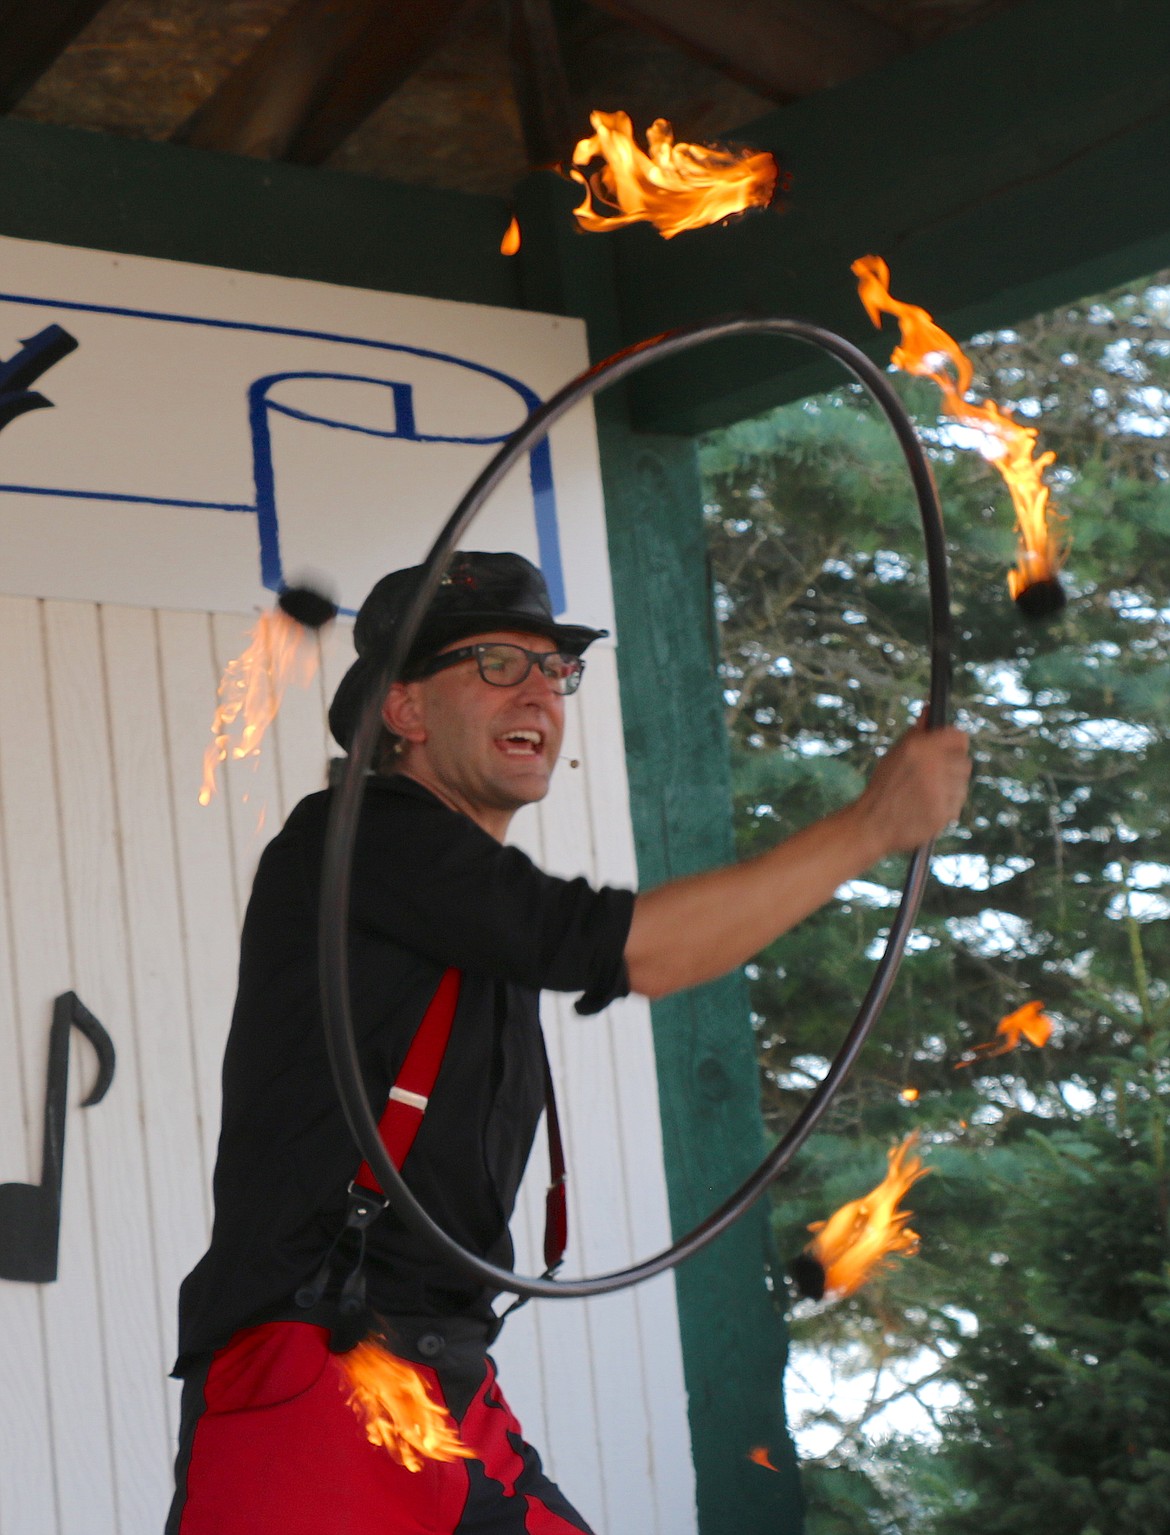 Peter Brunette spins a ring of fire during his juggling act at the Bonner County Fair on Saturday.